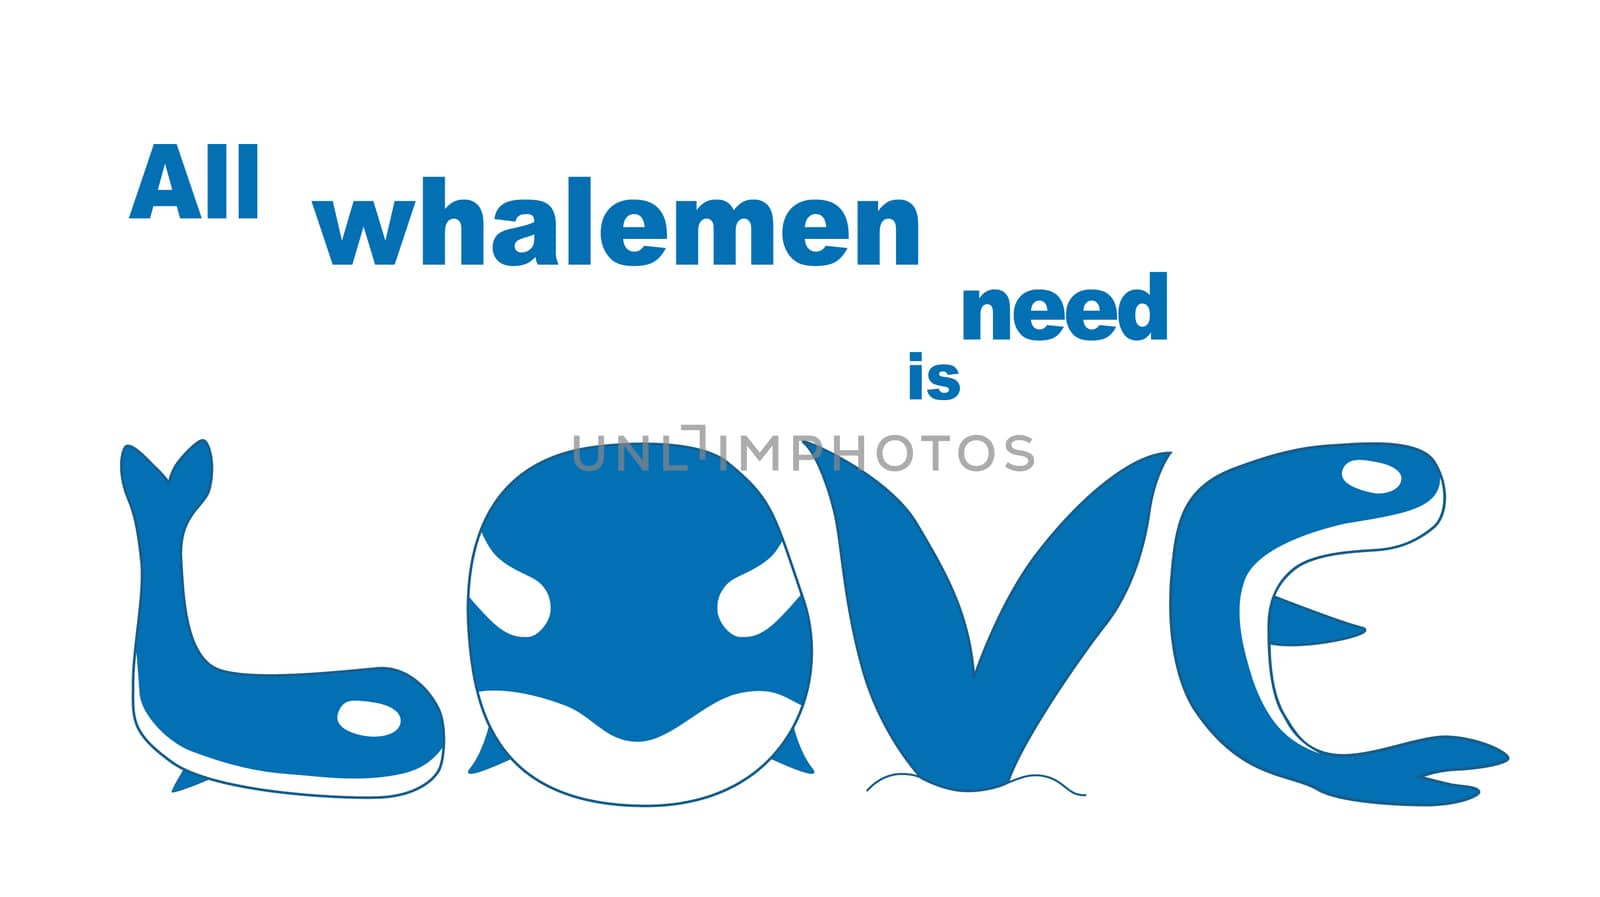 All whalemen need is LOVE